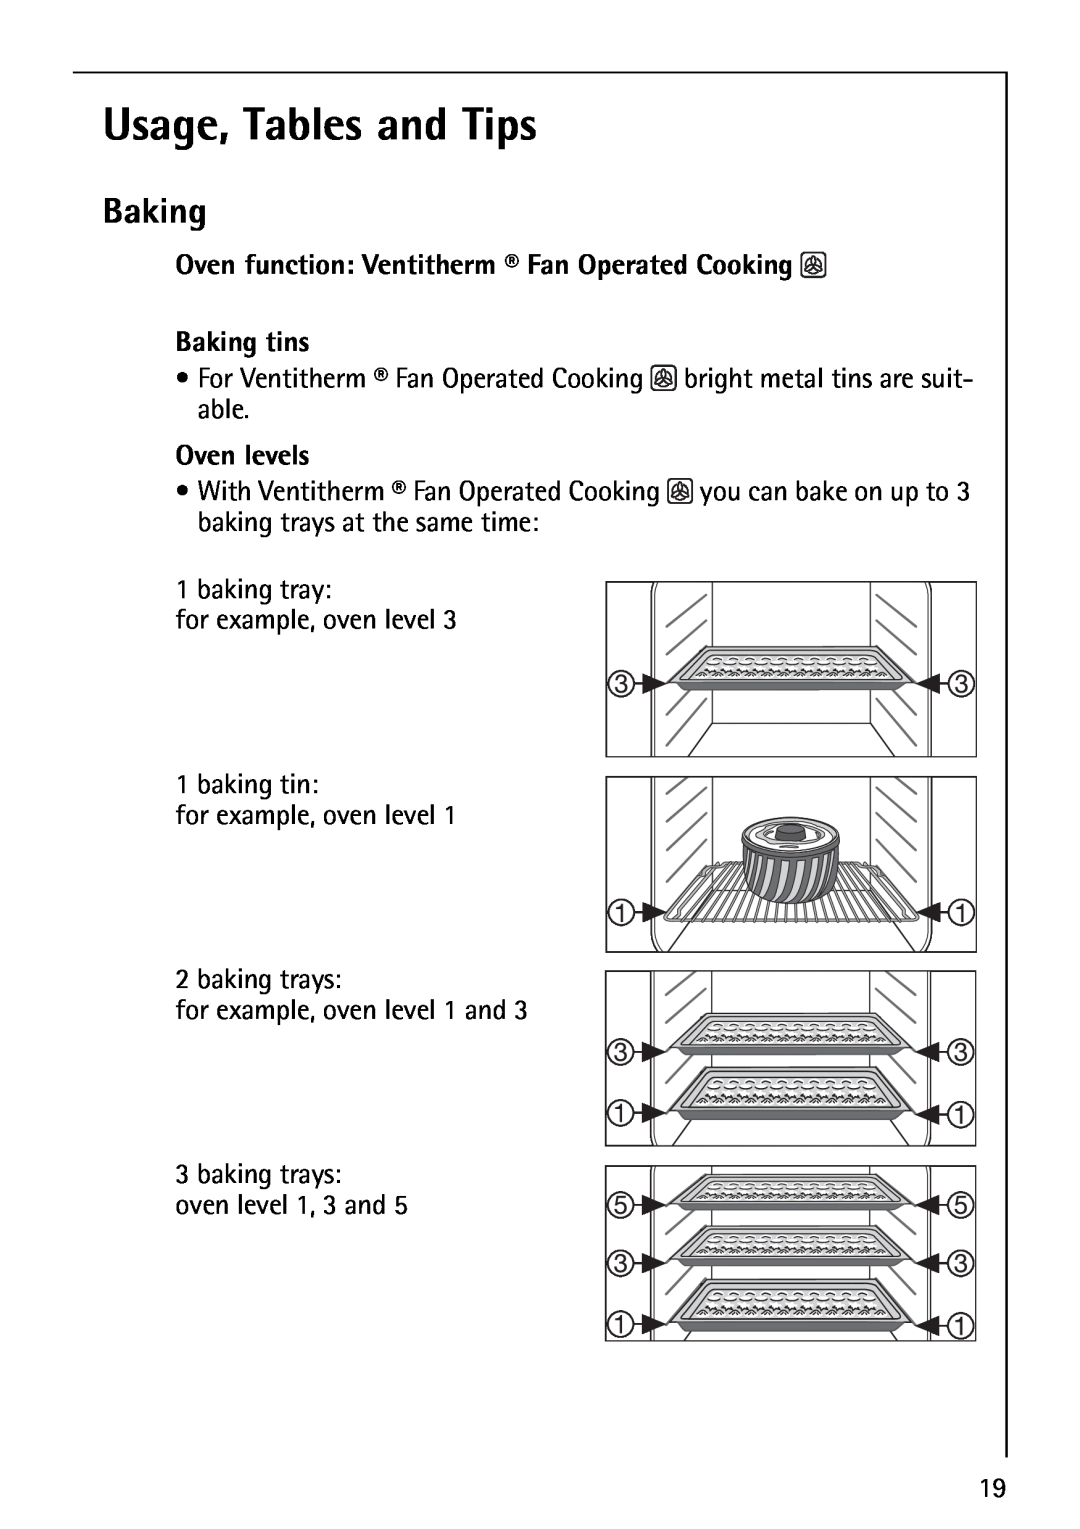 AEG B1180-4 manual Usage, Tables and Tips, Oven function: Ventitherm Fan Operated Cooking, Baking tins, Oven levels 